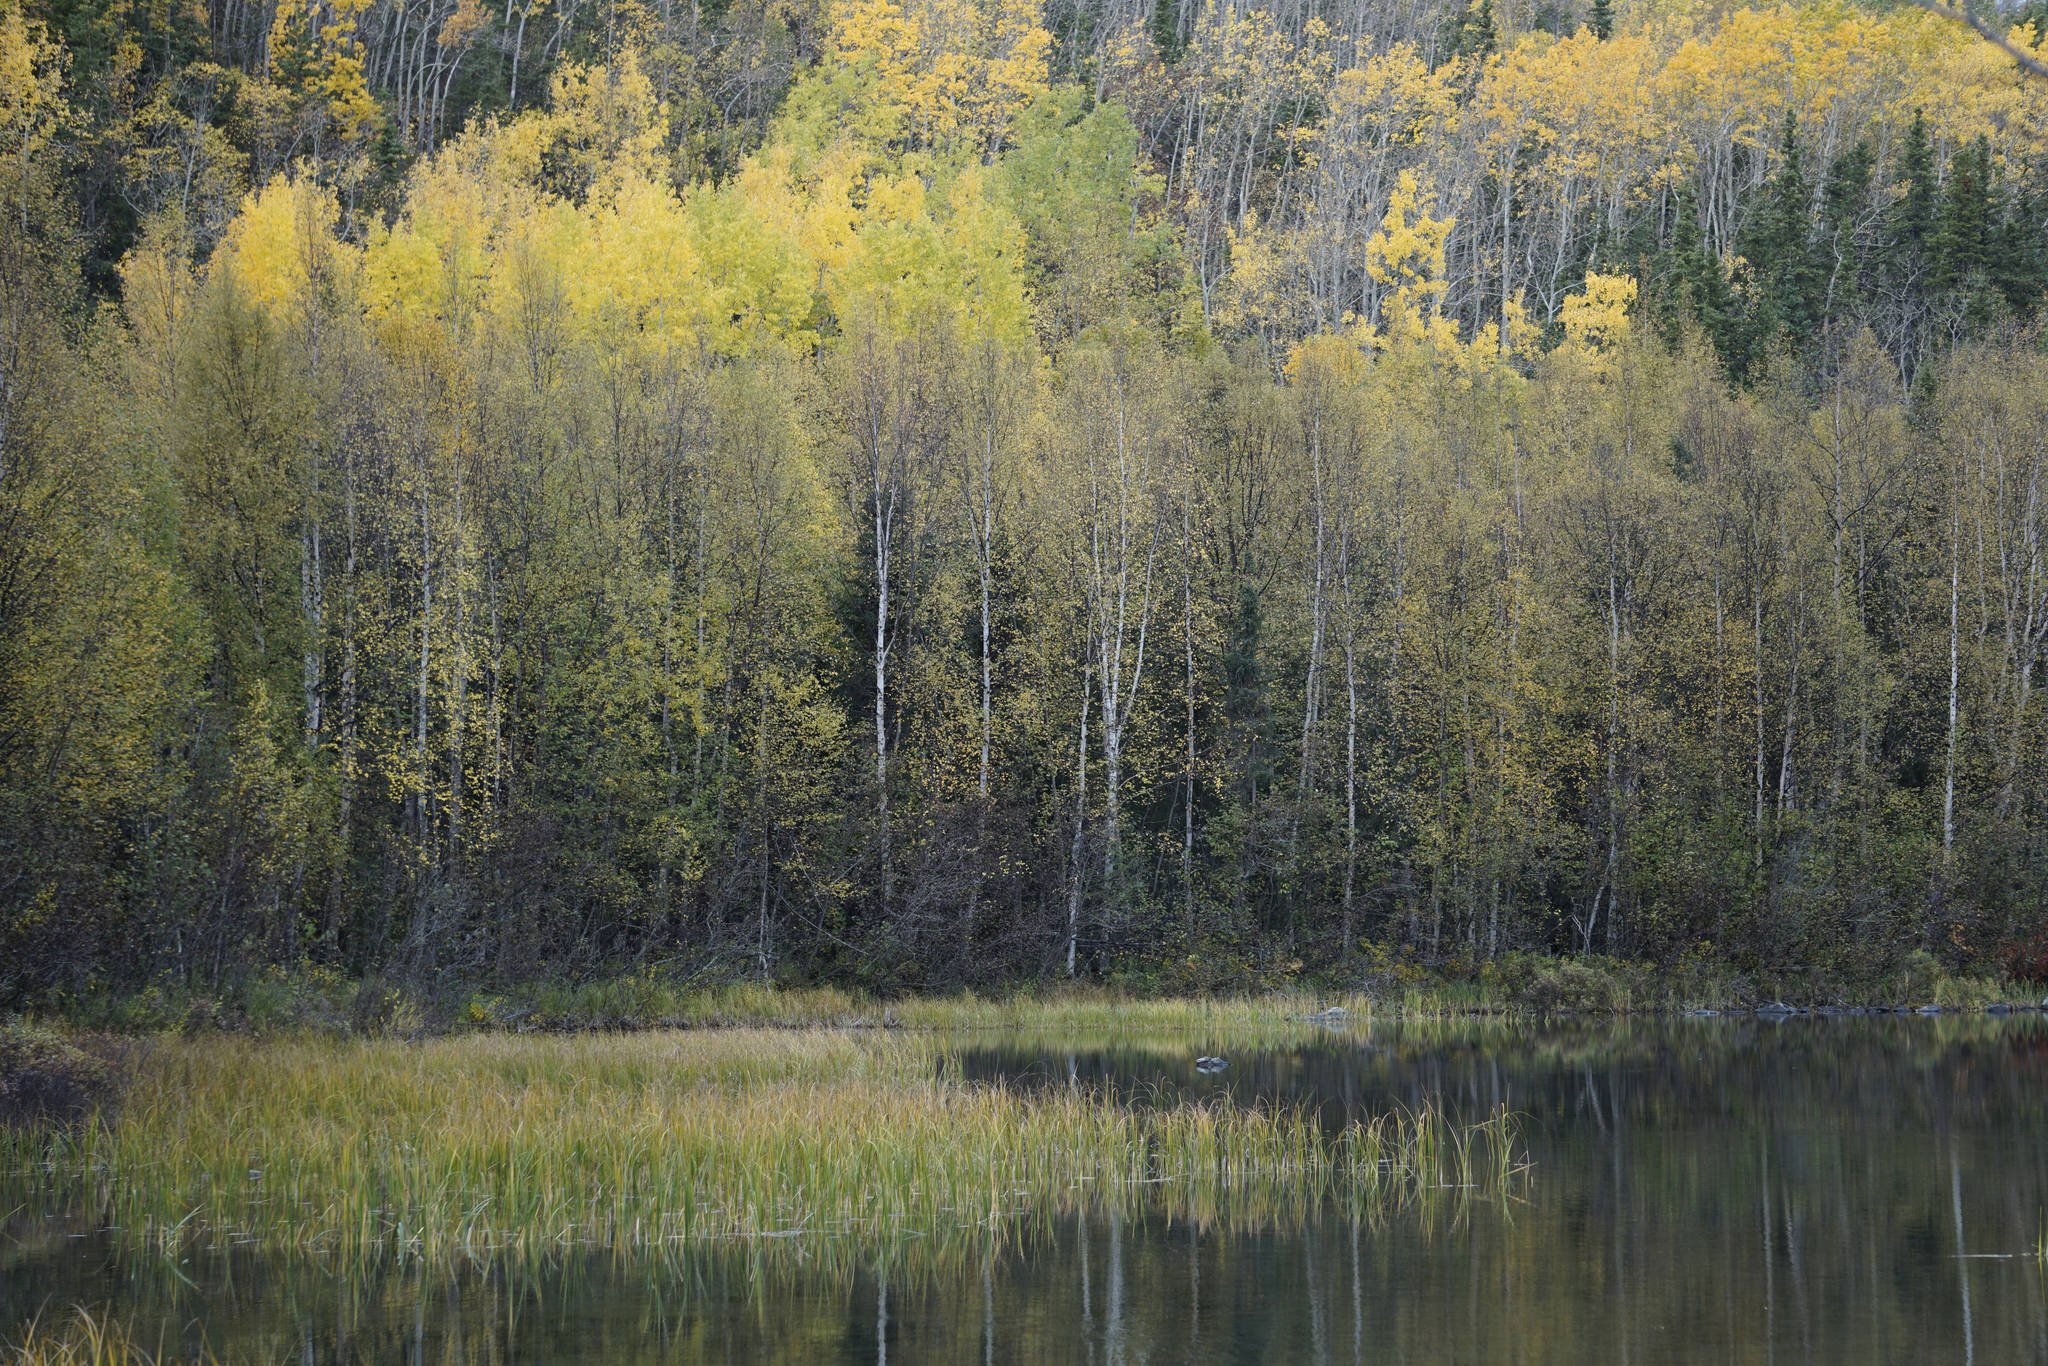 Birch trees offer a splash of fall color by Hidden Creek near Hidden Lake in the Kenai National Wildlife Refuge on Saturday, Sept. 29, 2018, near Sterling, Alaska. (Photo by Michael Armstrong/Homer News)